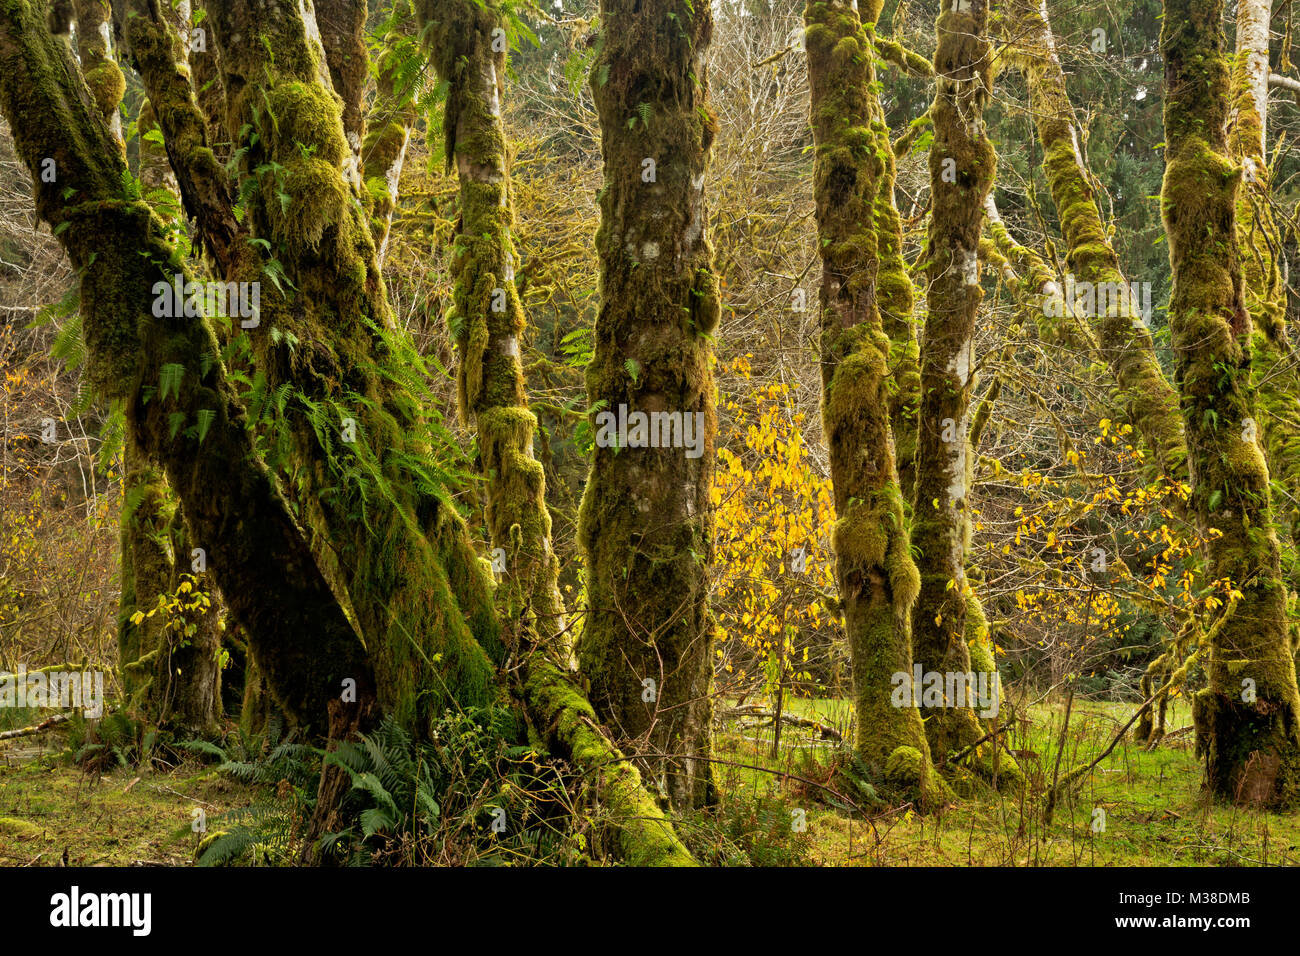 WA13302-00...WASHINGTON - Late fall in the Queets Rain Forest as viewed from Sams River Trail in Olympic National Park. Stock Photo